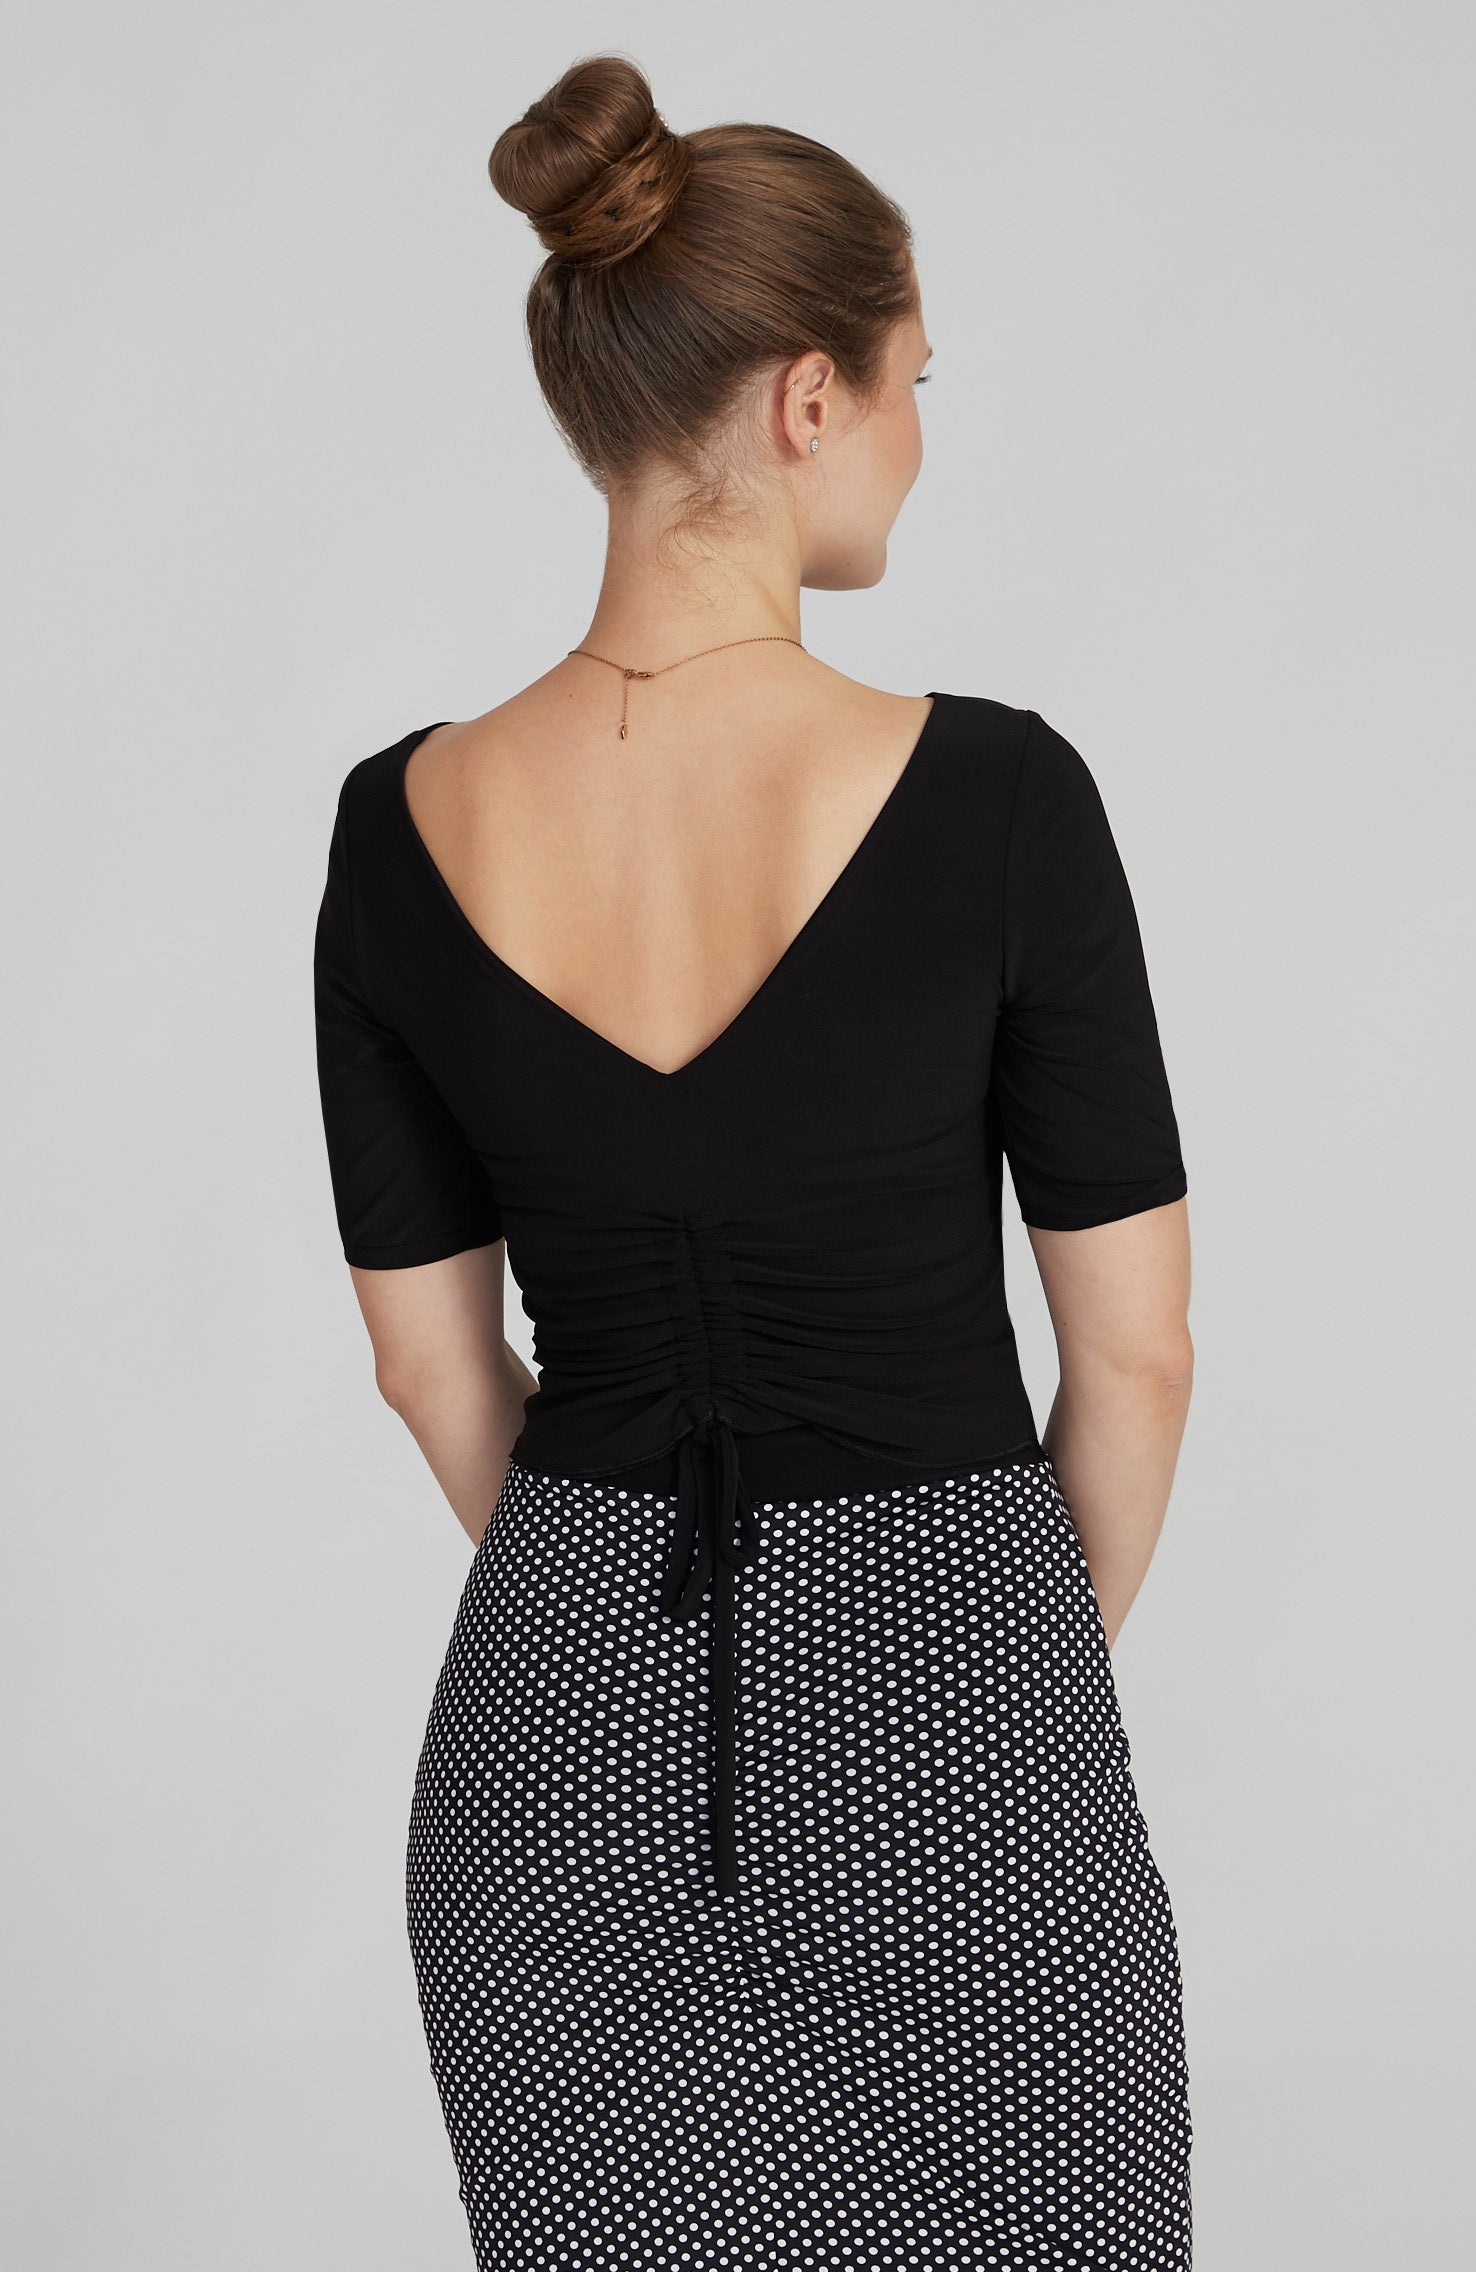 DOROTEA - Black Draped Top with Sleeves